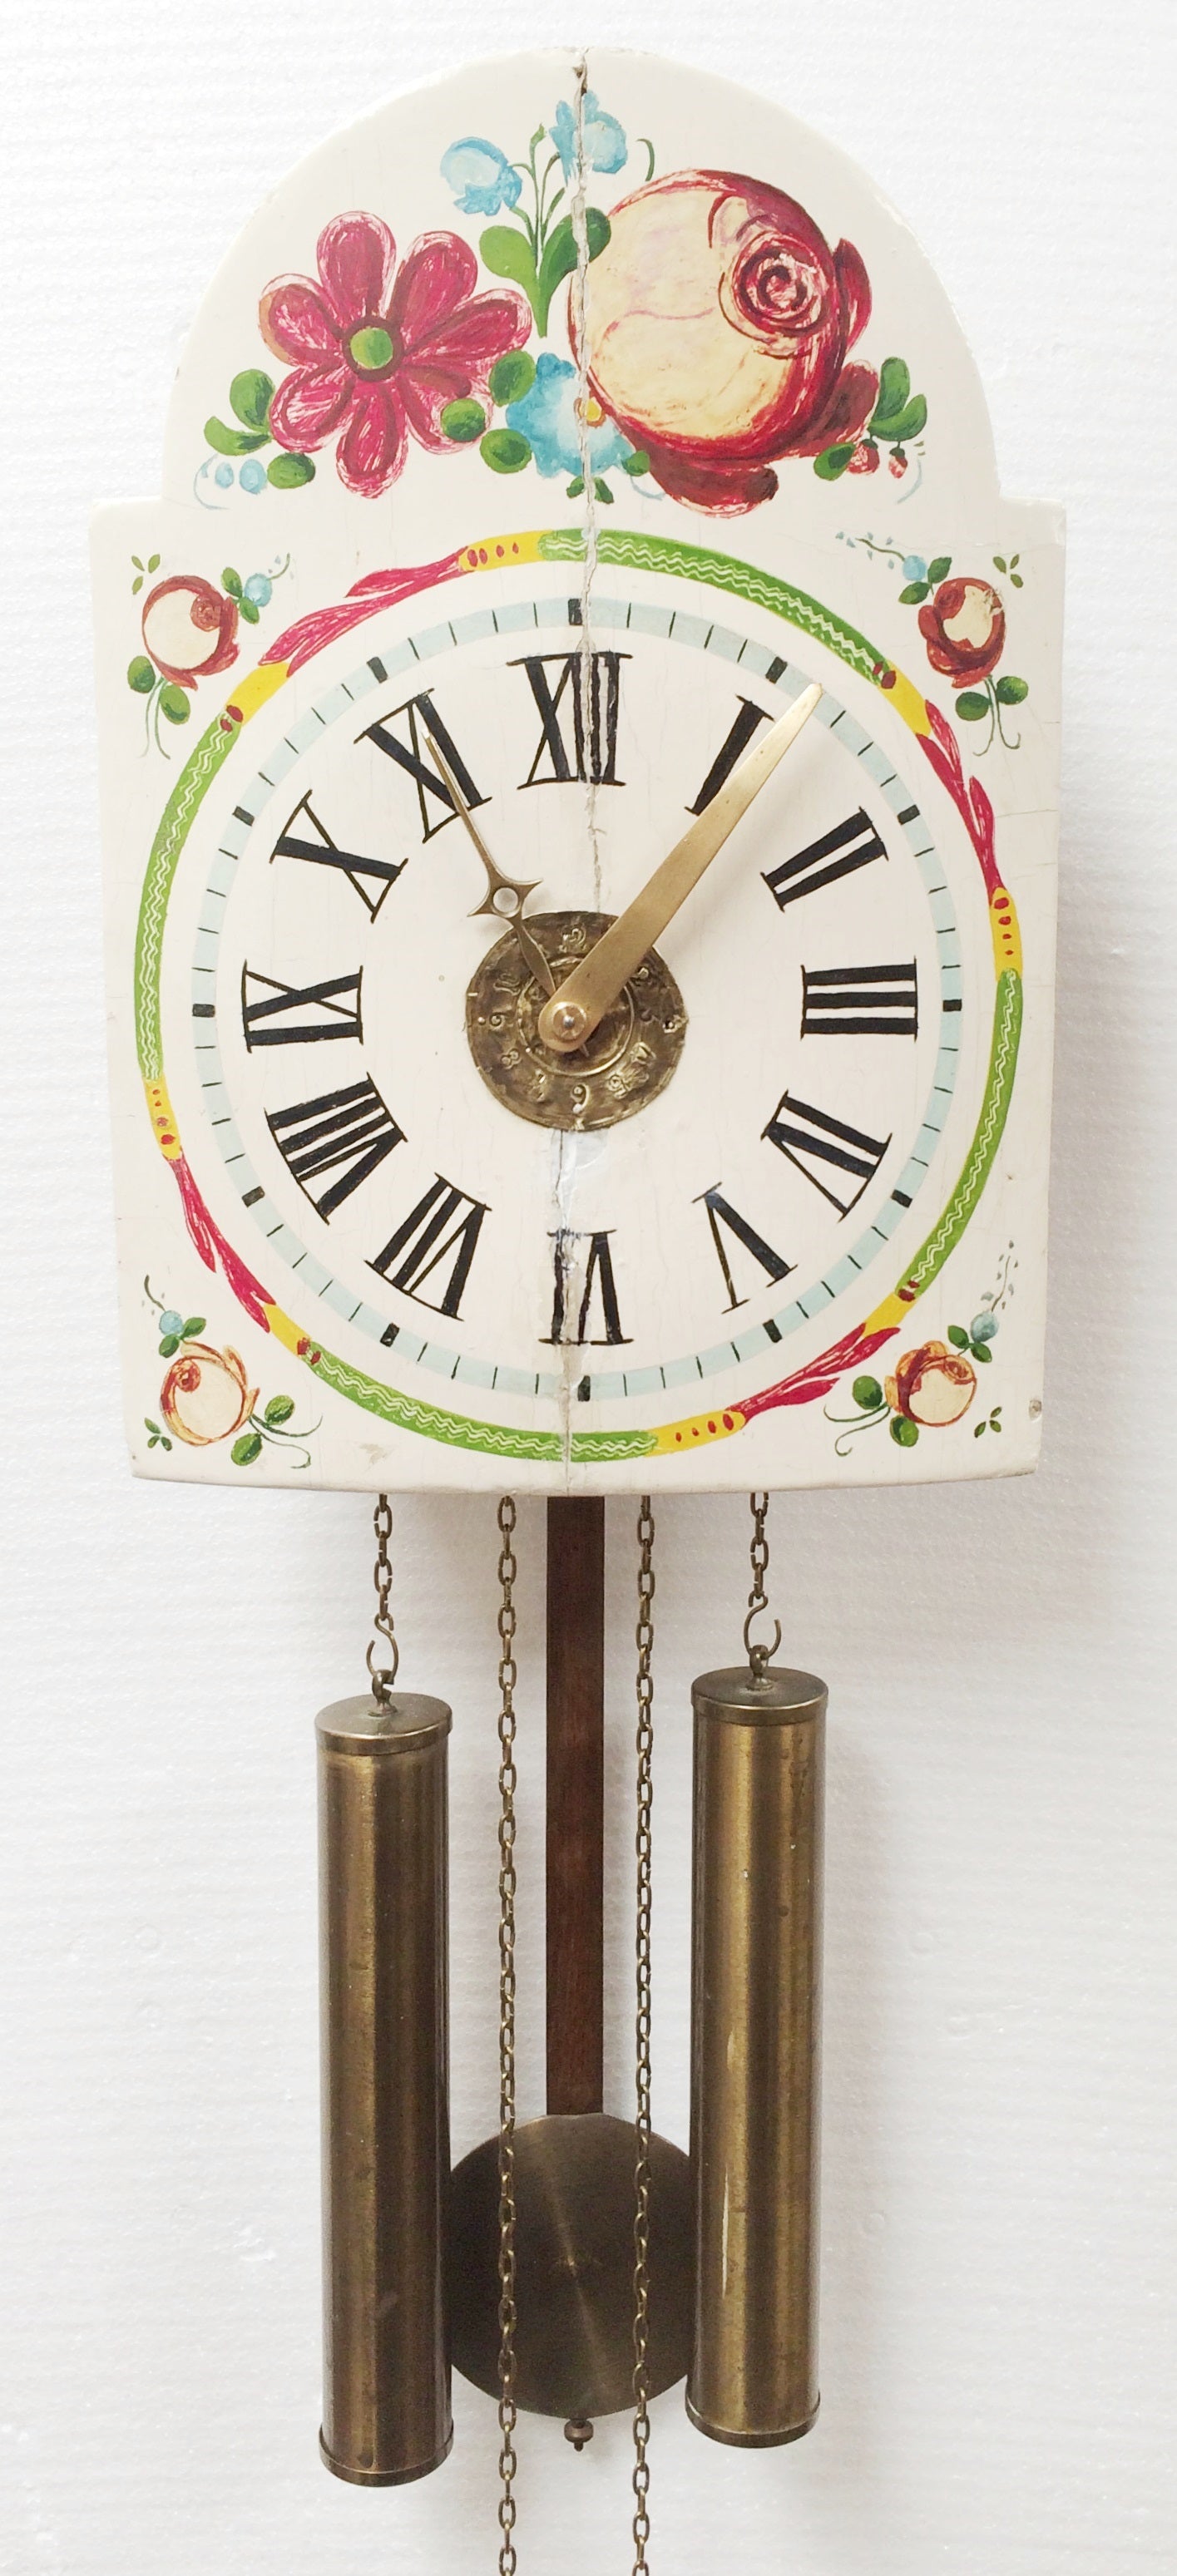 Antique ODIN Pendulum Chime Wall Clock | eXibit collection